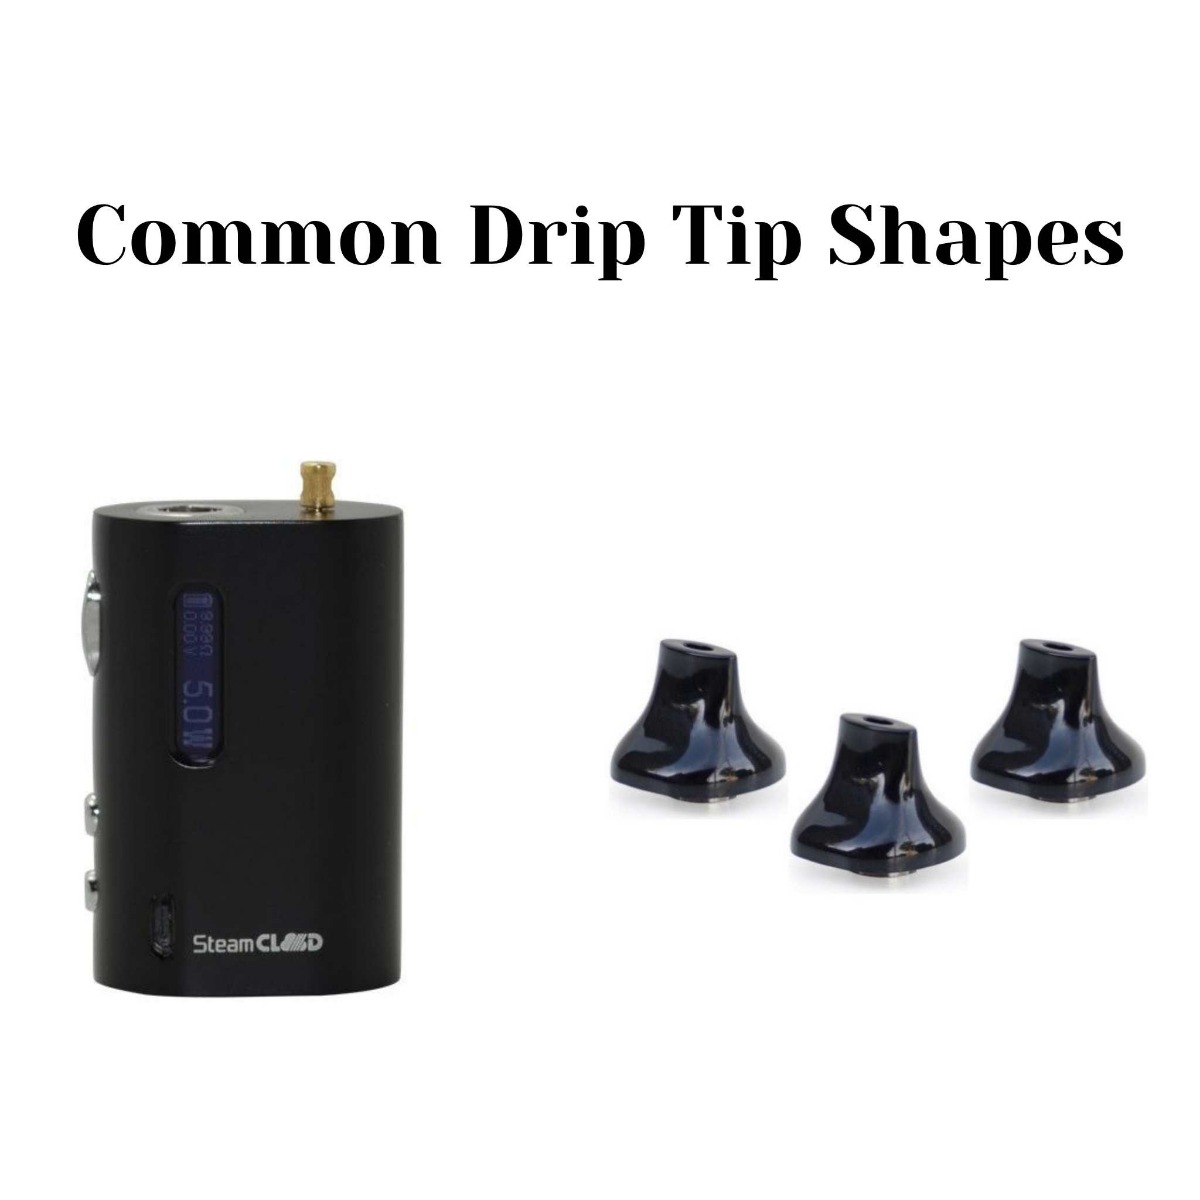 black box mod and black mouthpieces with text saying Common Drip Tip Shapes